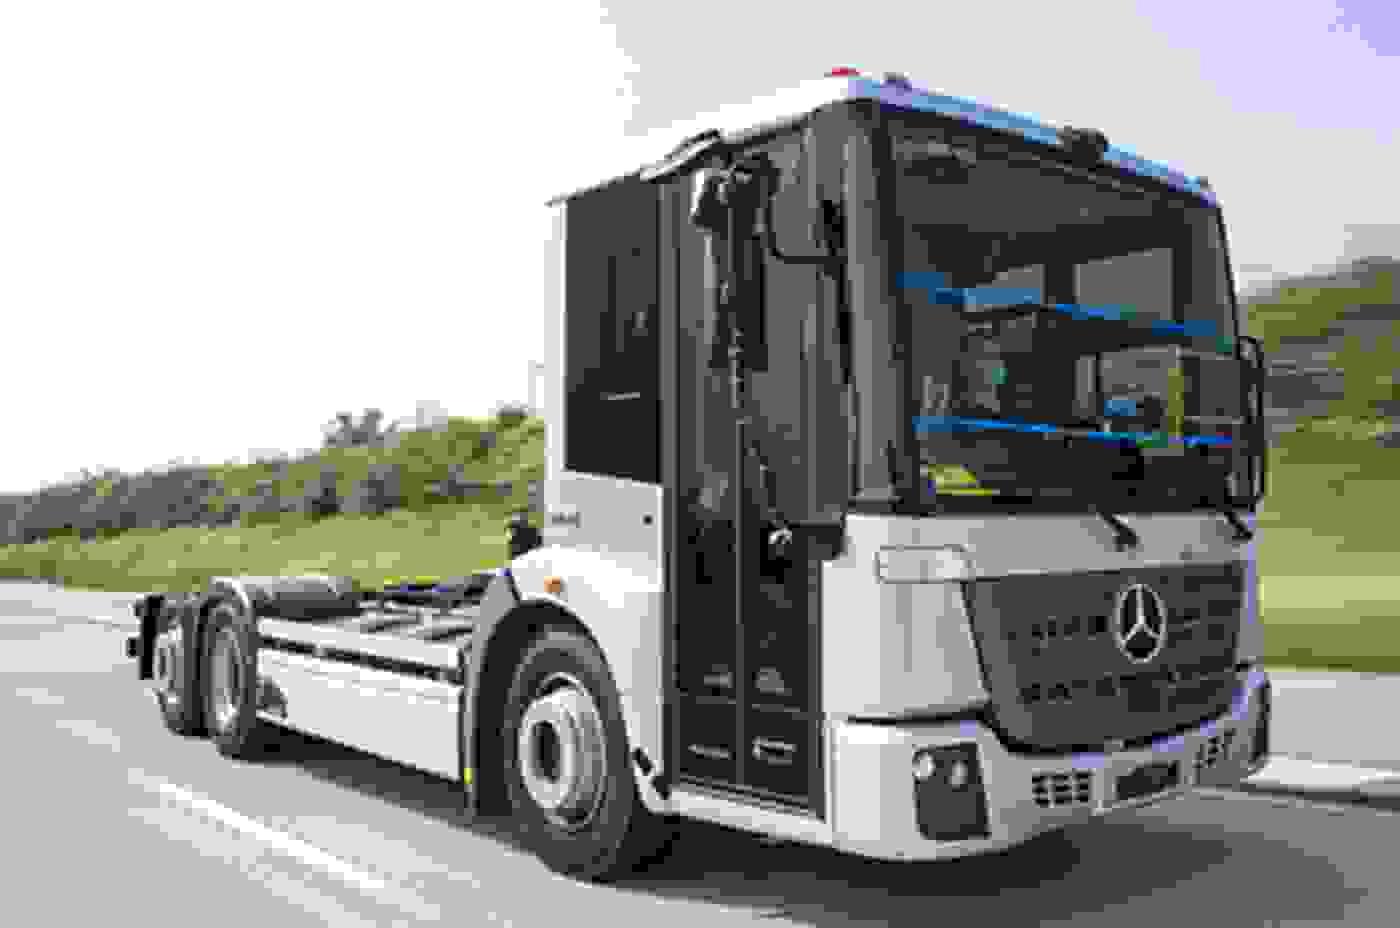 Mercedes-Benz Trucks lands a sensational awards double and now sets its sustainability sights on an exciting 2022 